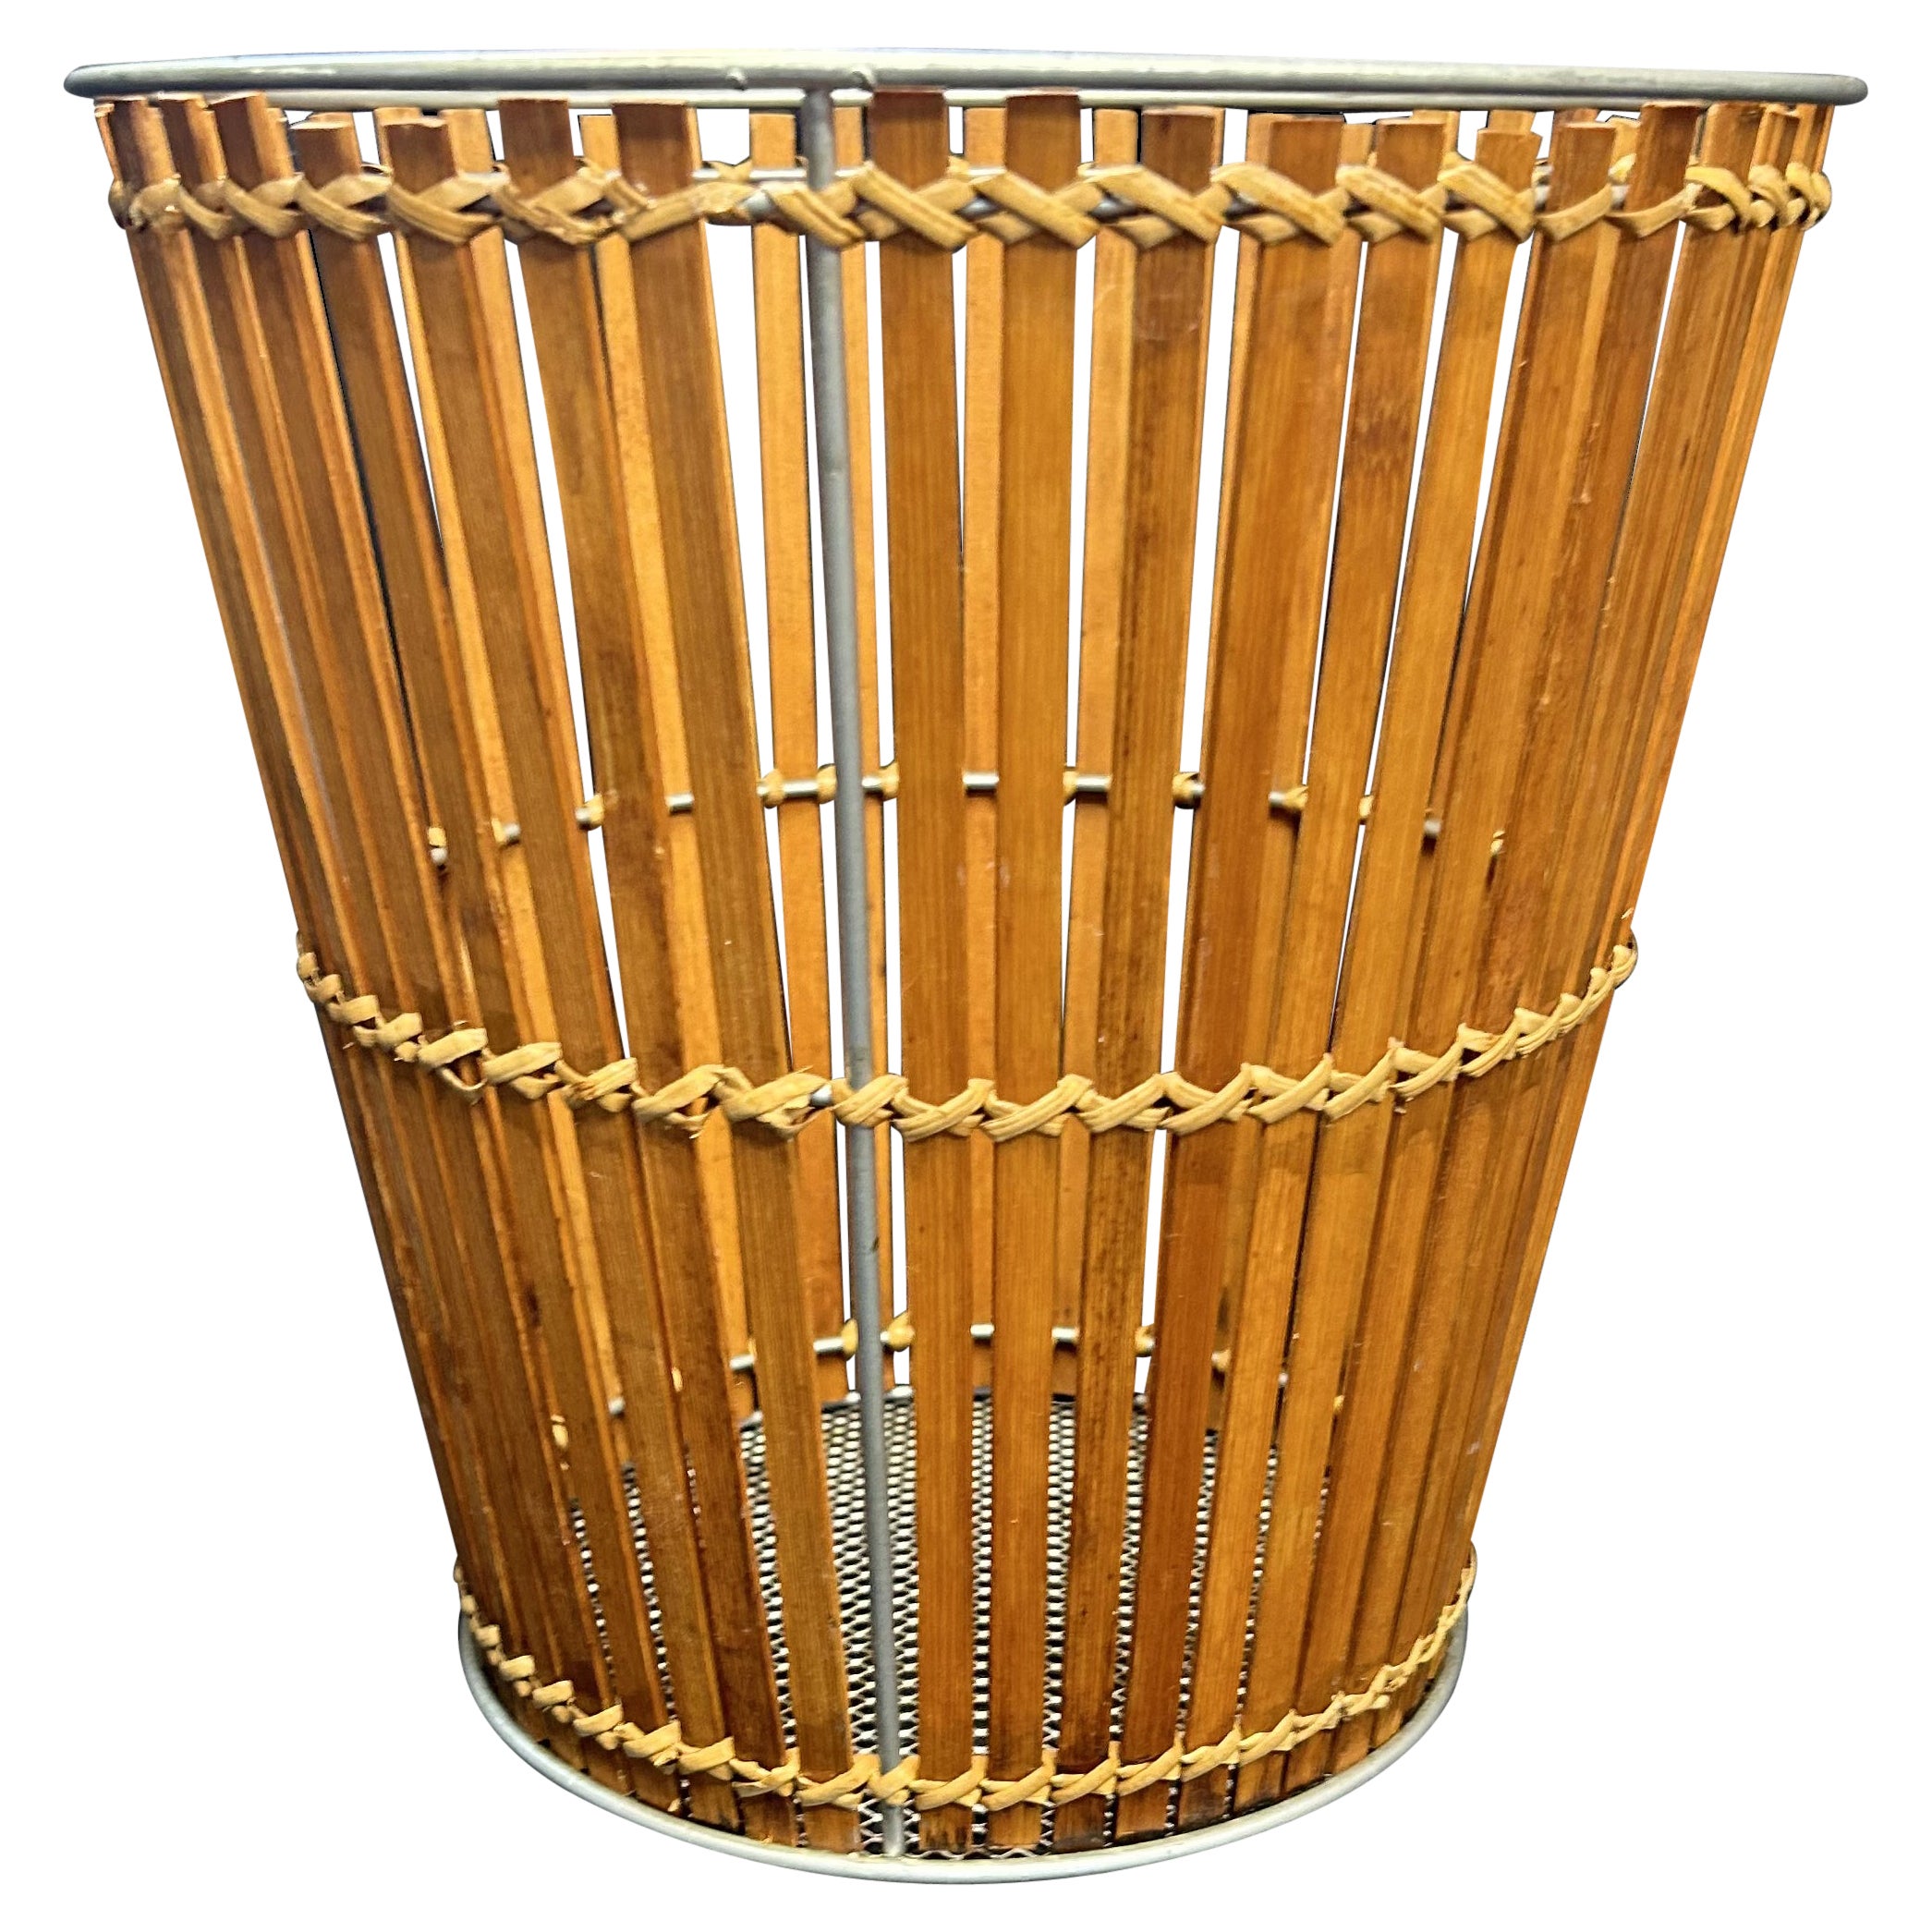 Slatted Bamboo and Rattan Waste Paper Basket